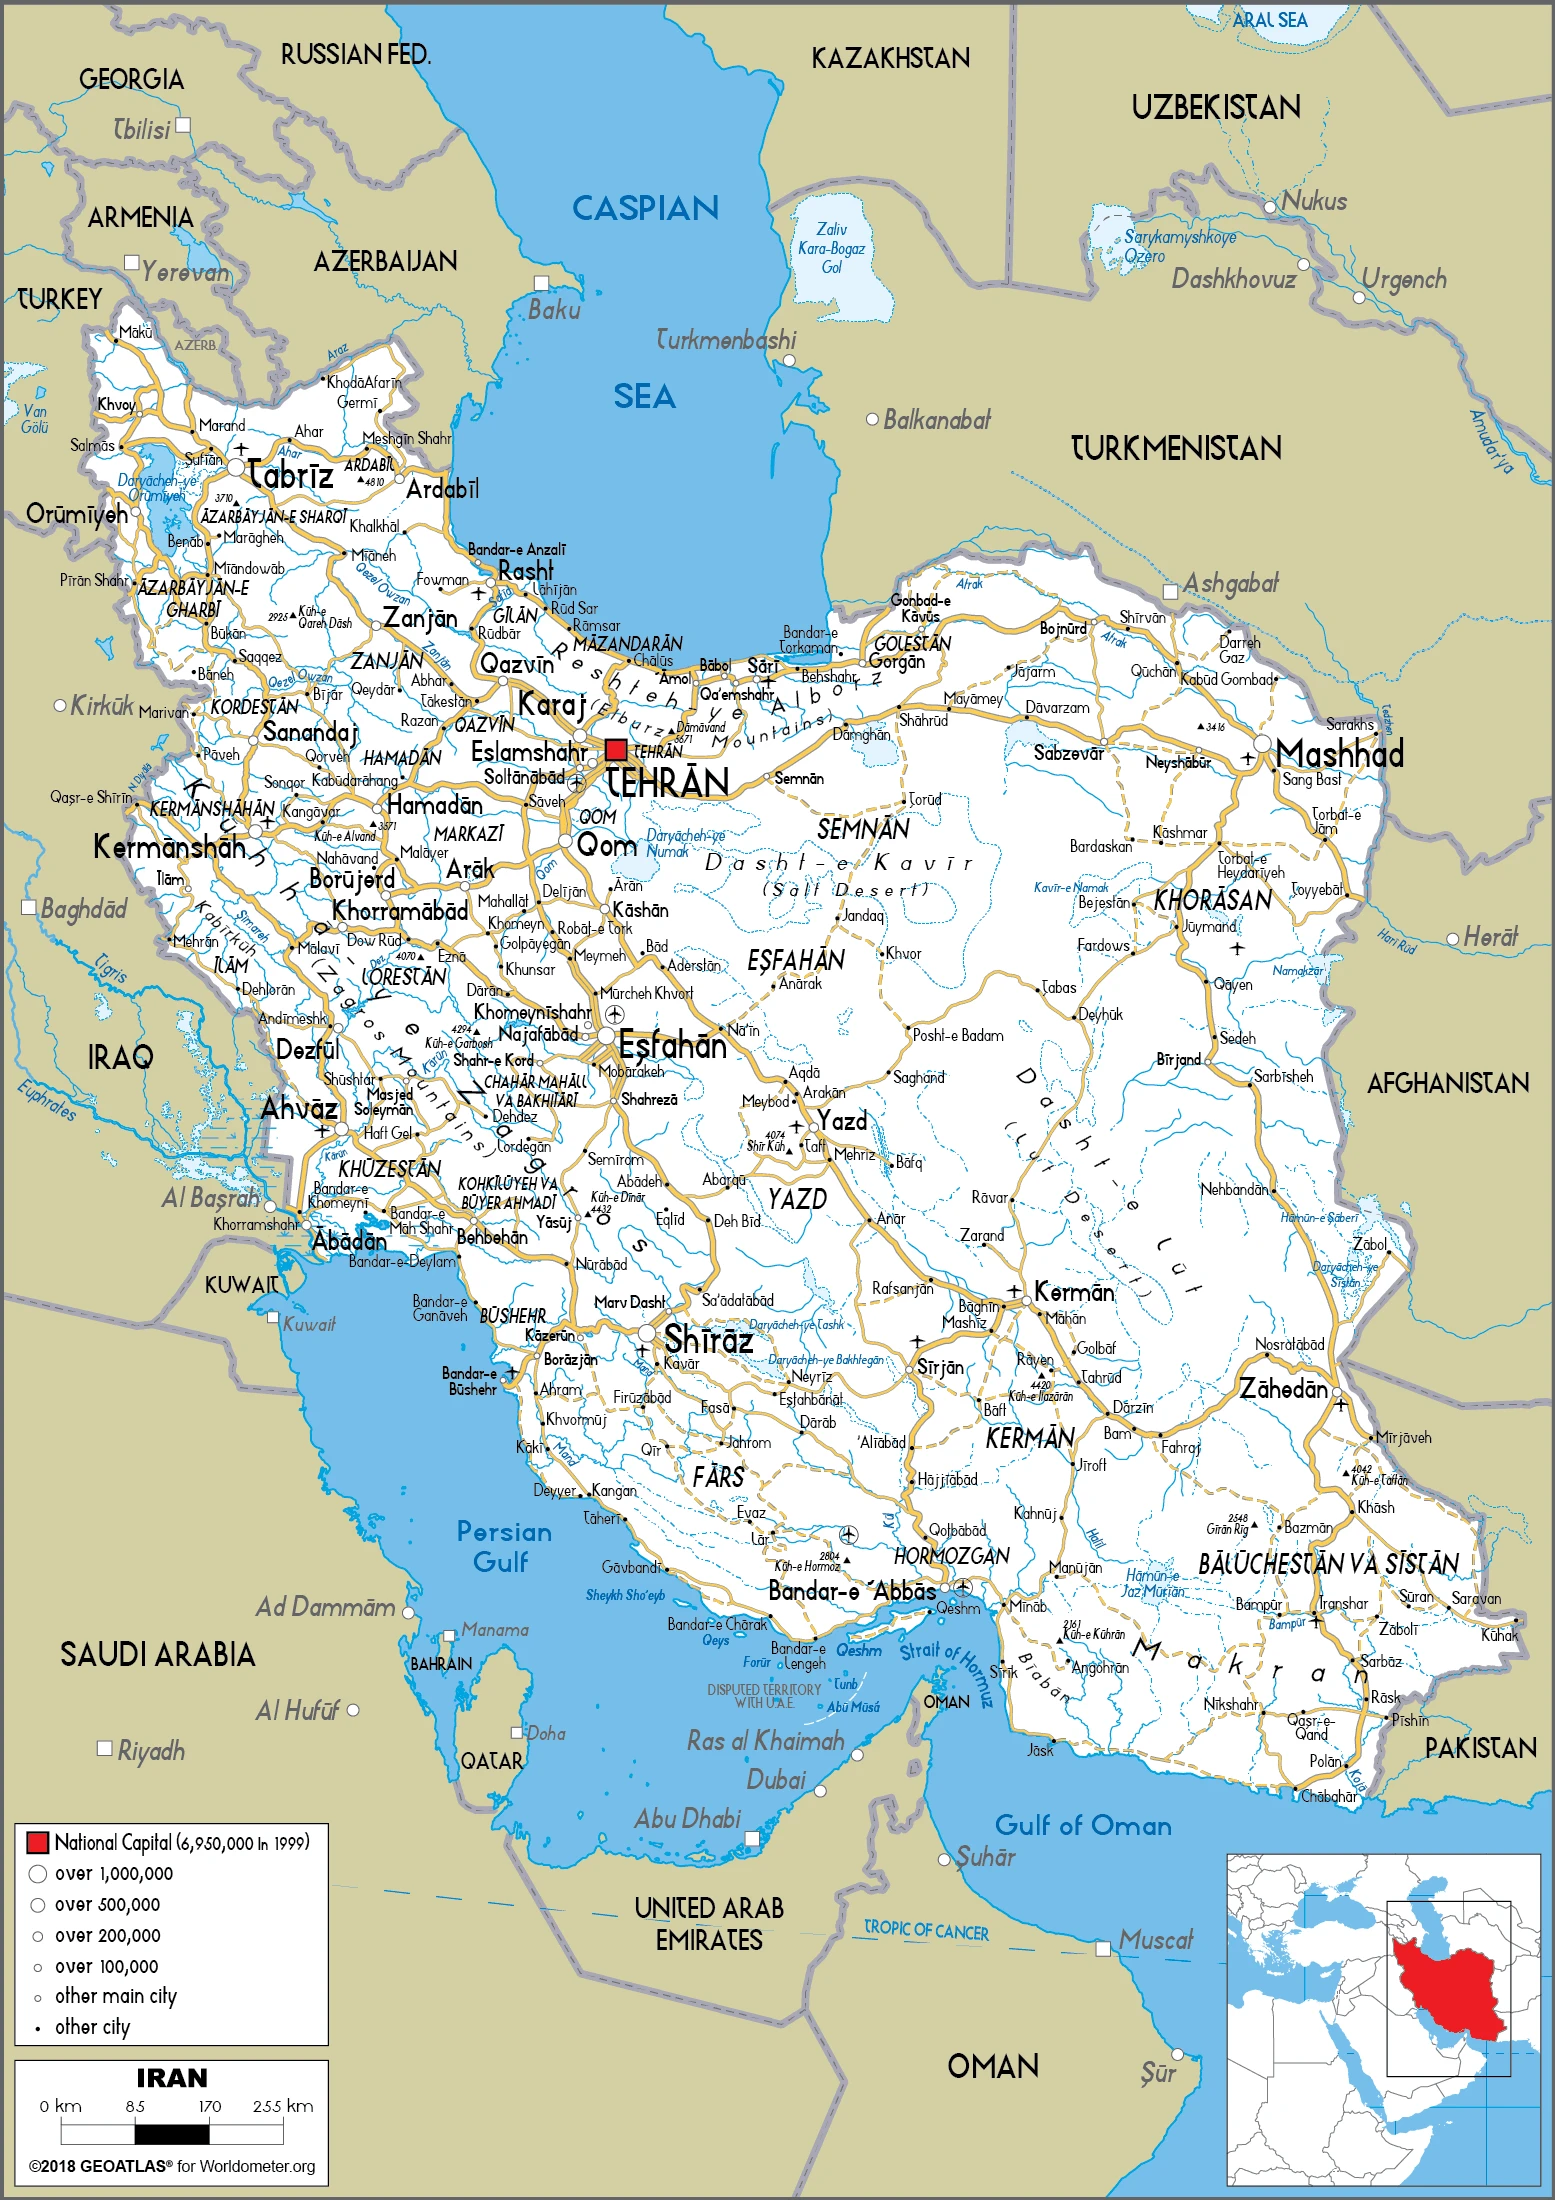 The route plan of the Iranian roadways.